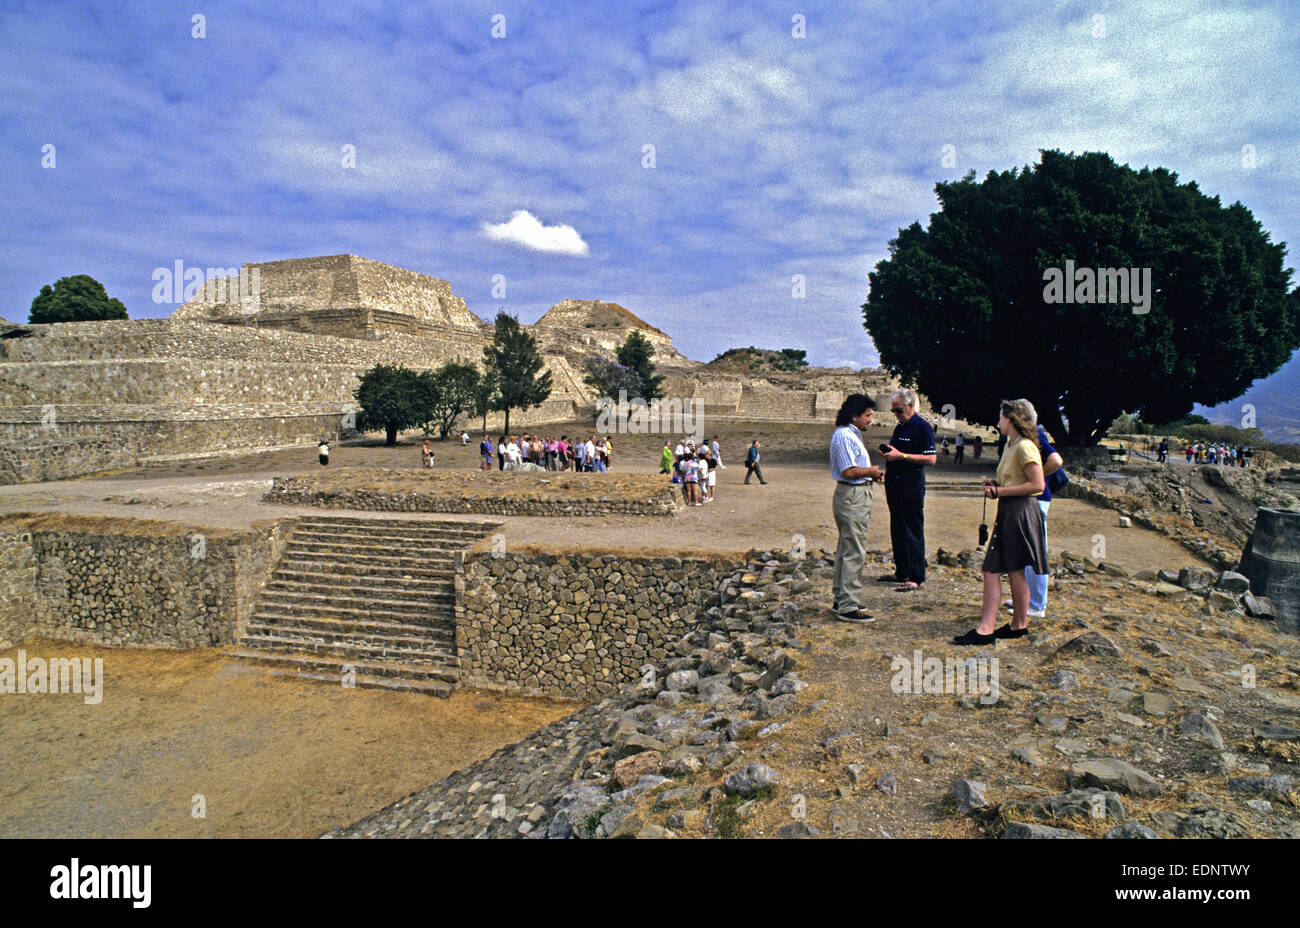 Treasures found at Monte Alban in Oaxaca, Mexico, during excavations of the large pre-Columbian archaeological site. The site includes many well preserved buildings this one ifrom the end of a ball court. Stock Photo